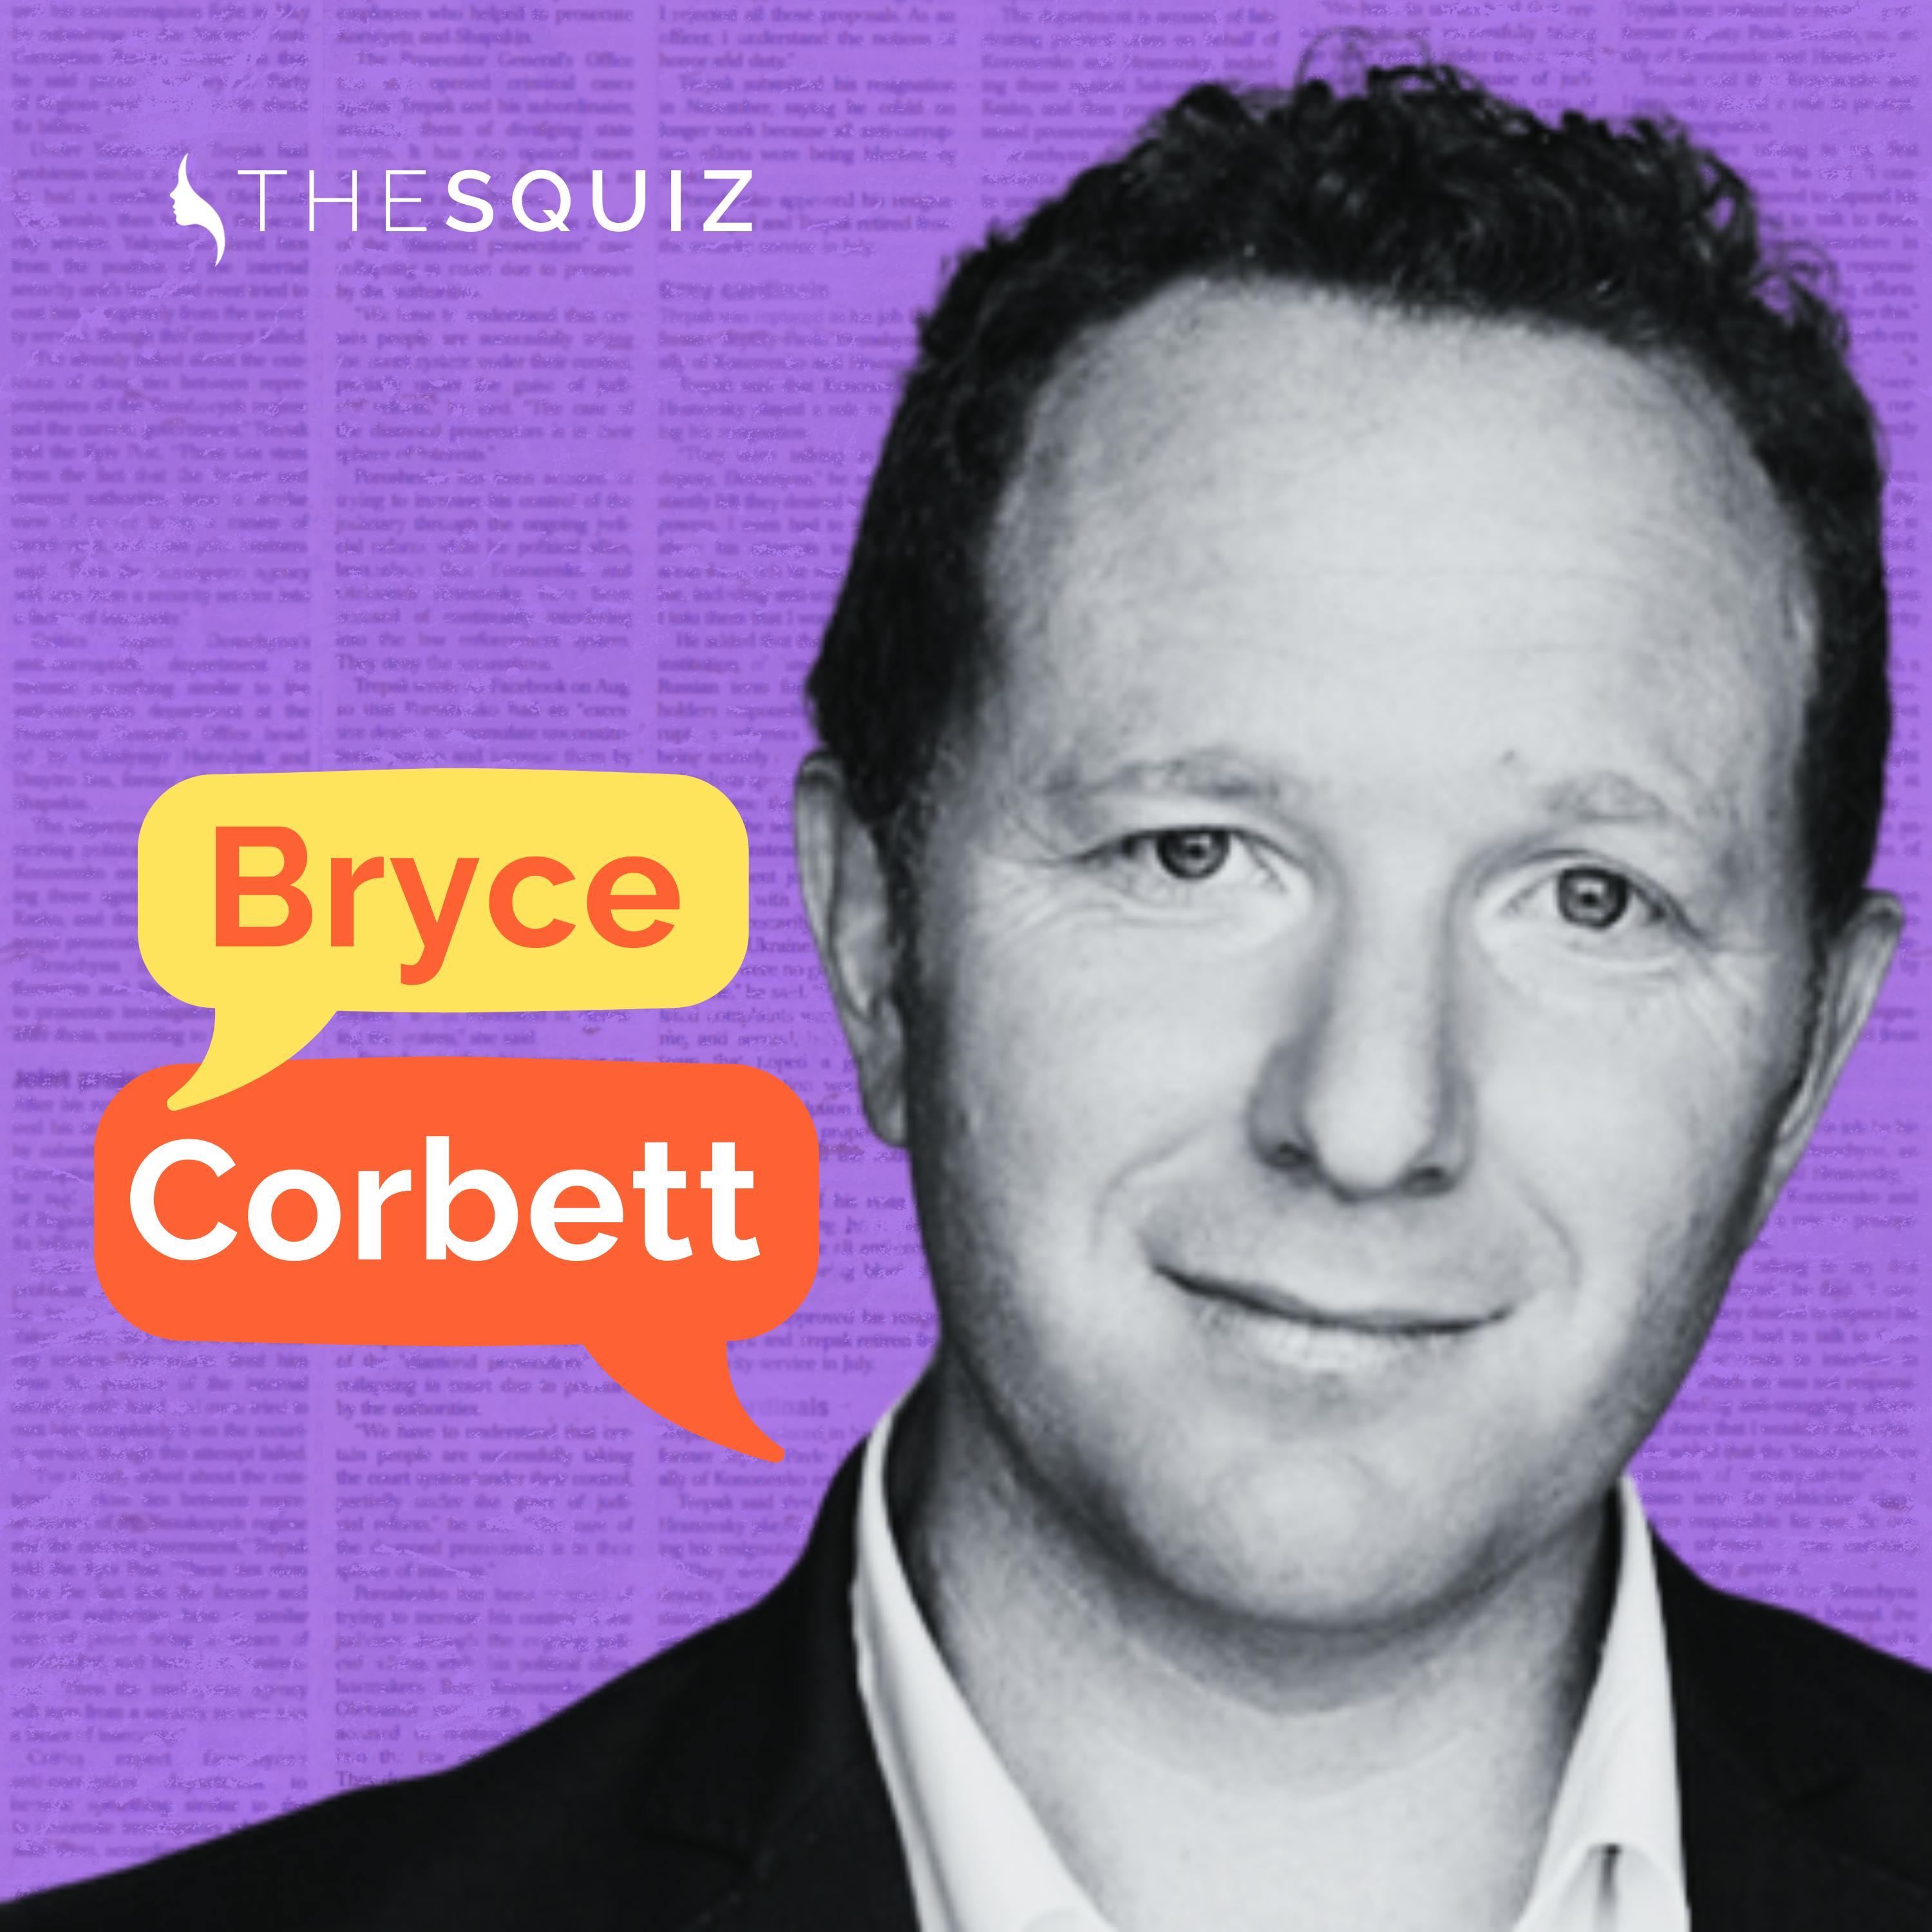 Interview: Bryce Corbett on teaching the next generation to be media literate